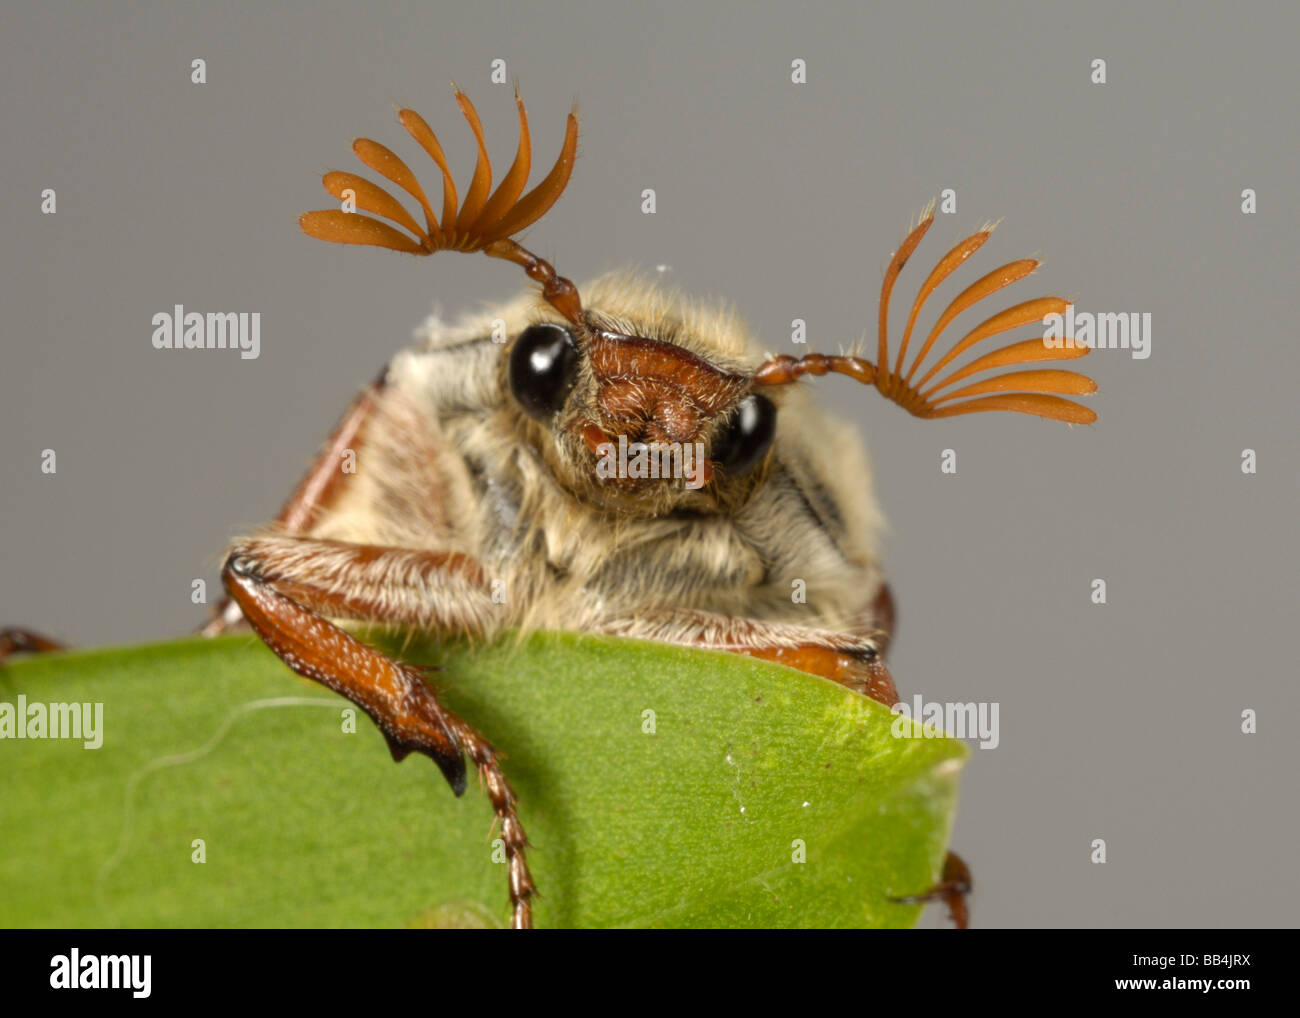 Head and antennae of an adult cockchafer Melolontha melolontha or may bug on a leaf Stock Photo